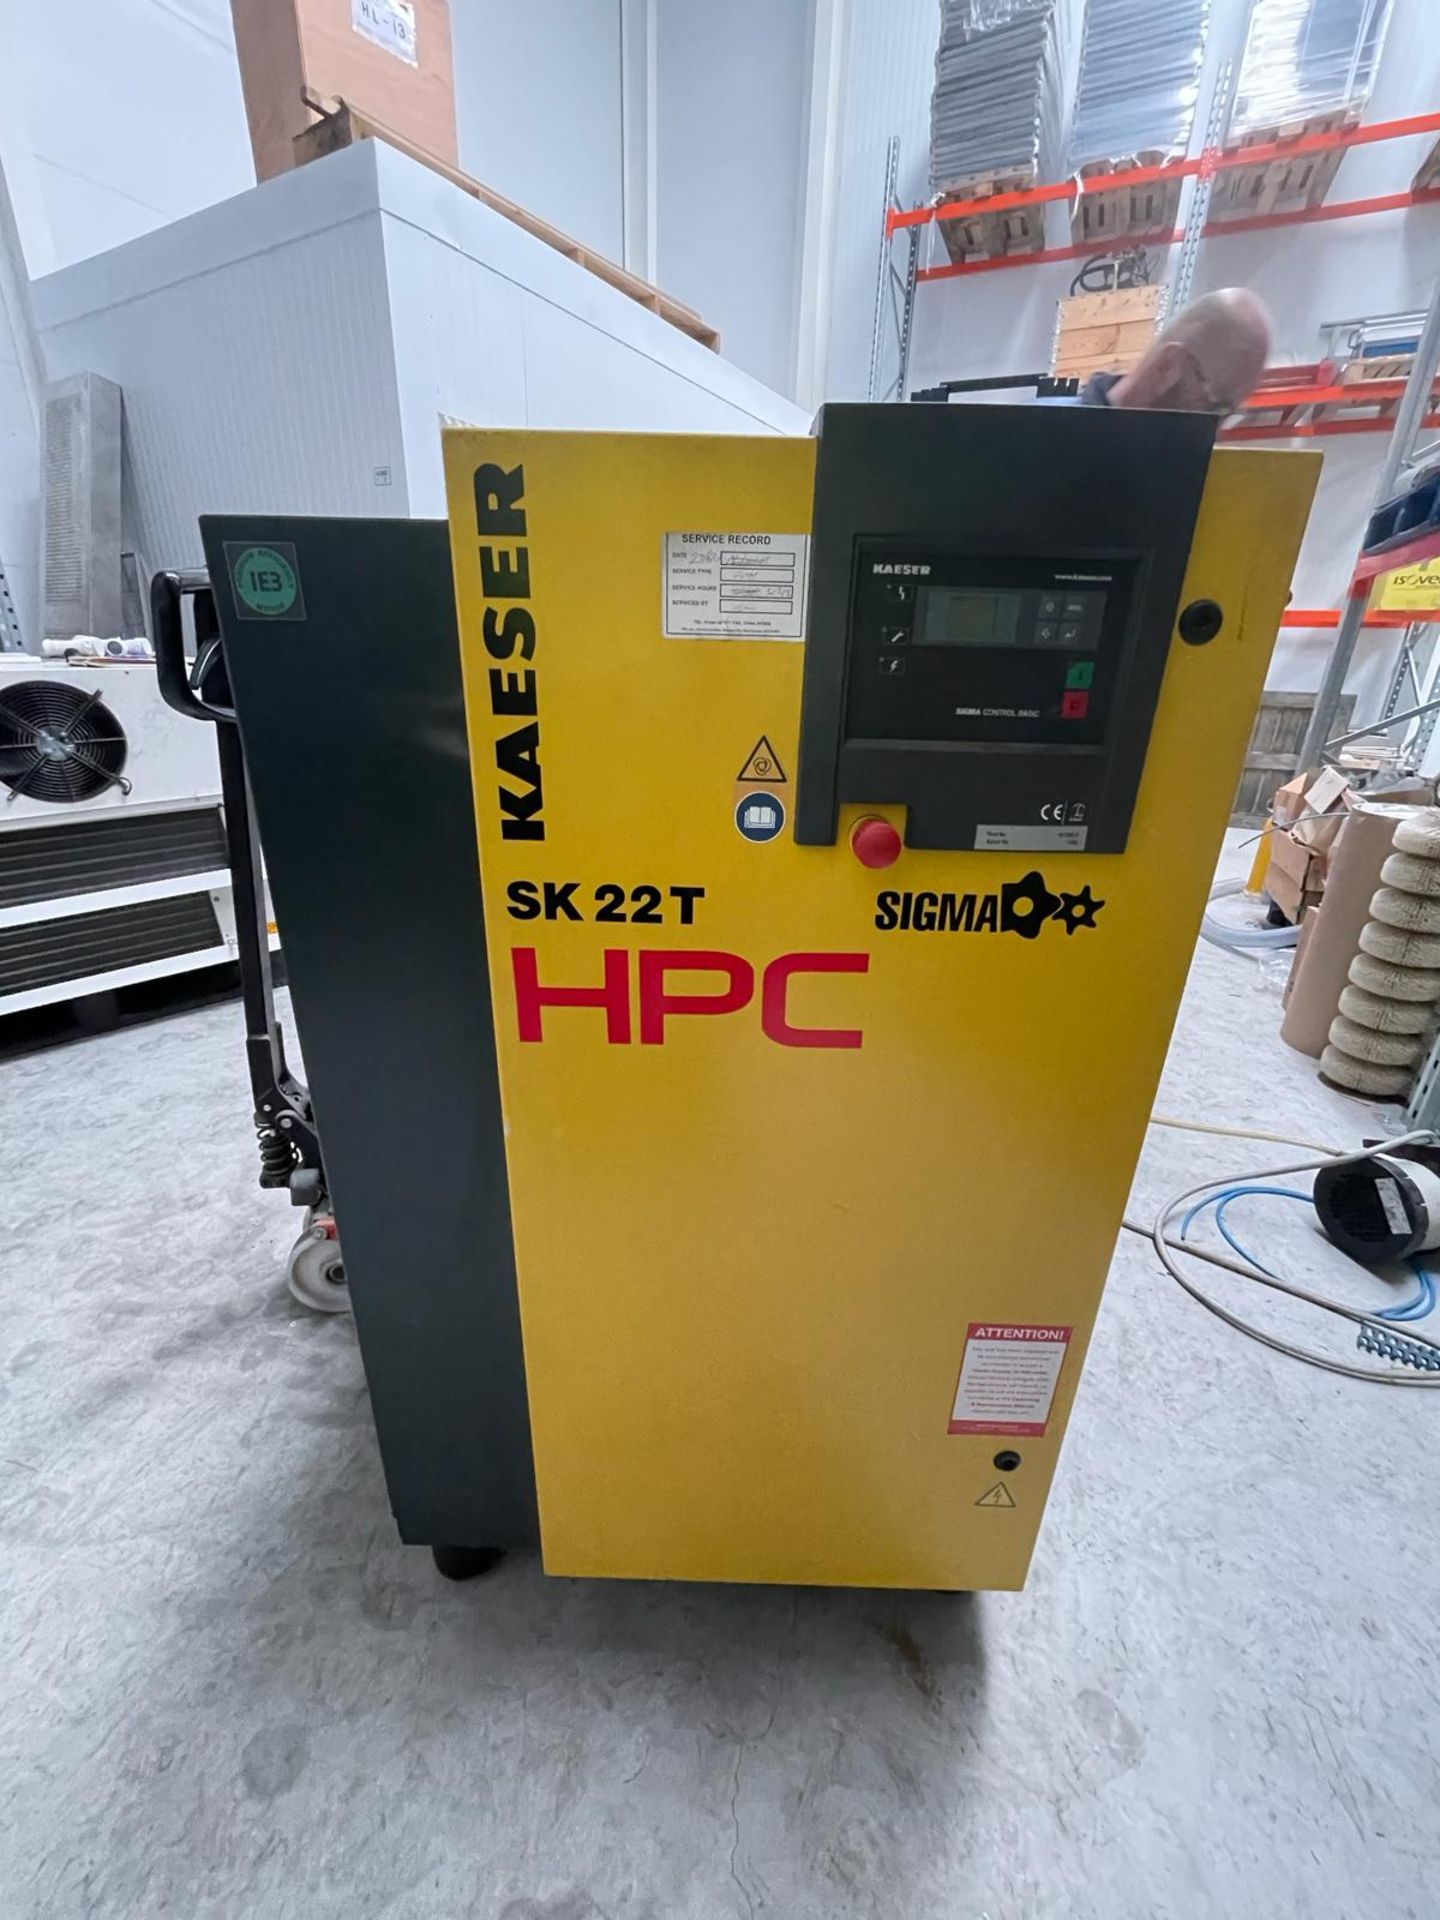 2013 Kaeser HPC SK 22 T 8 Bar Air compressor. Approx. 1200 x 700 x 1300 mm. Please note this lot - Image 5 of 16